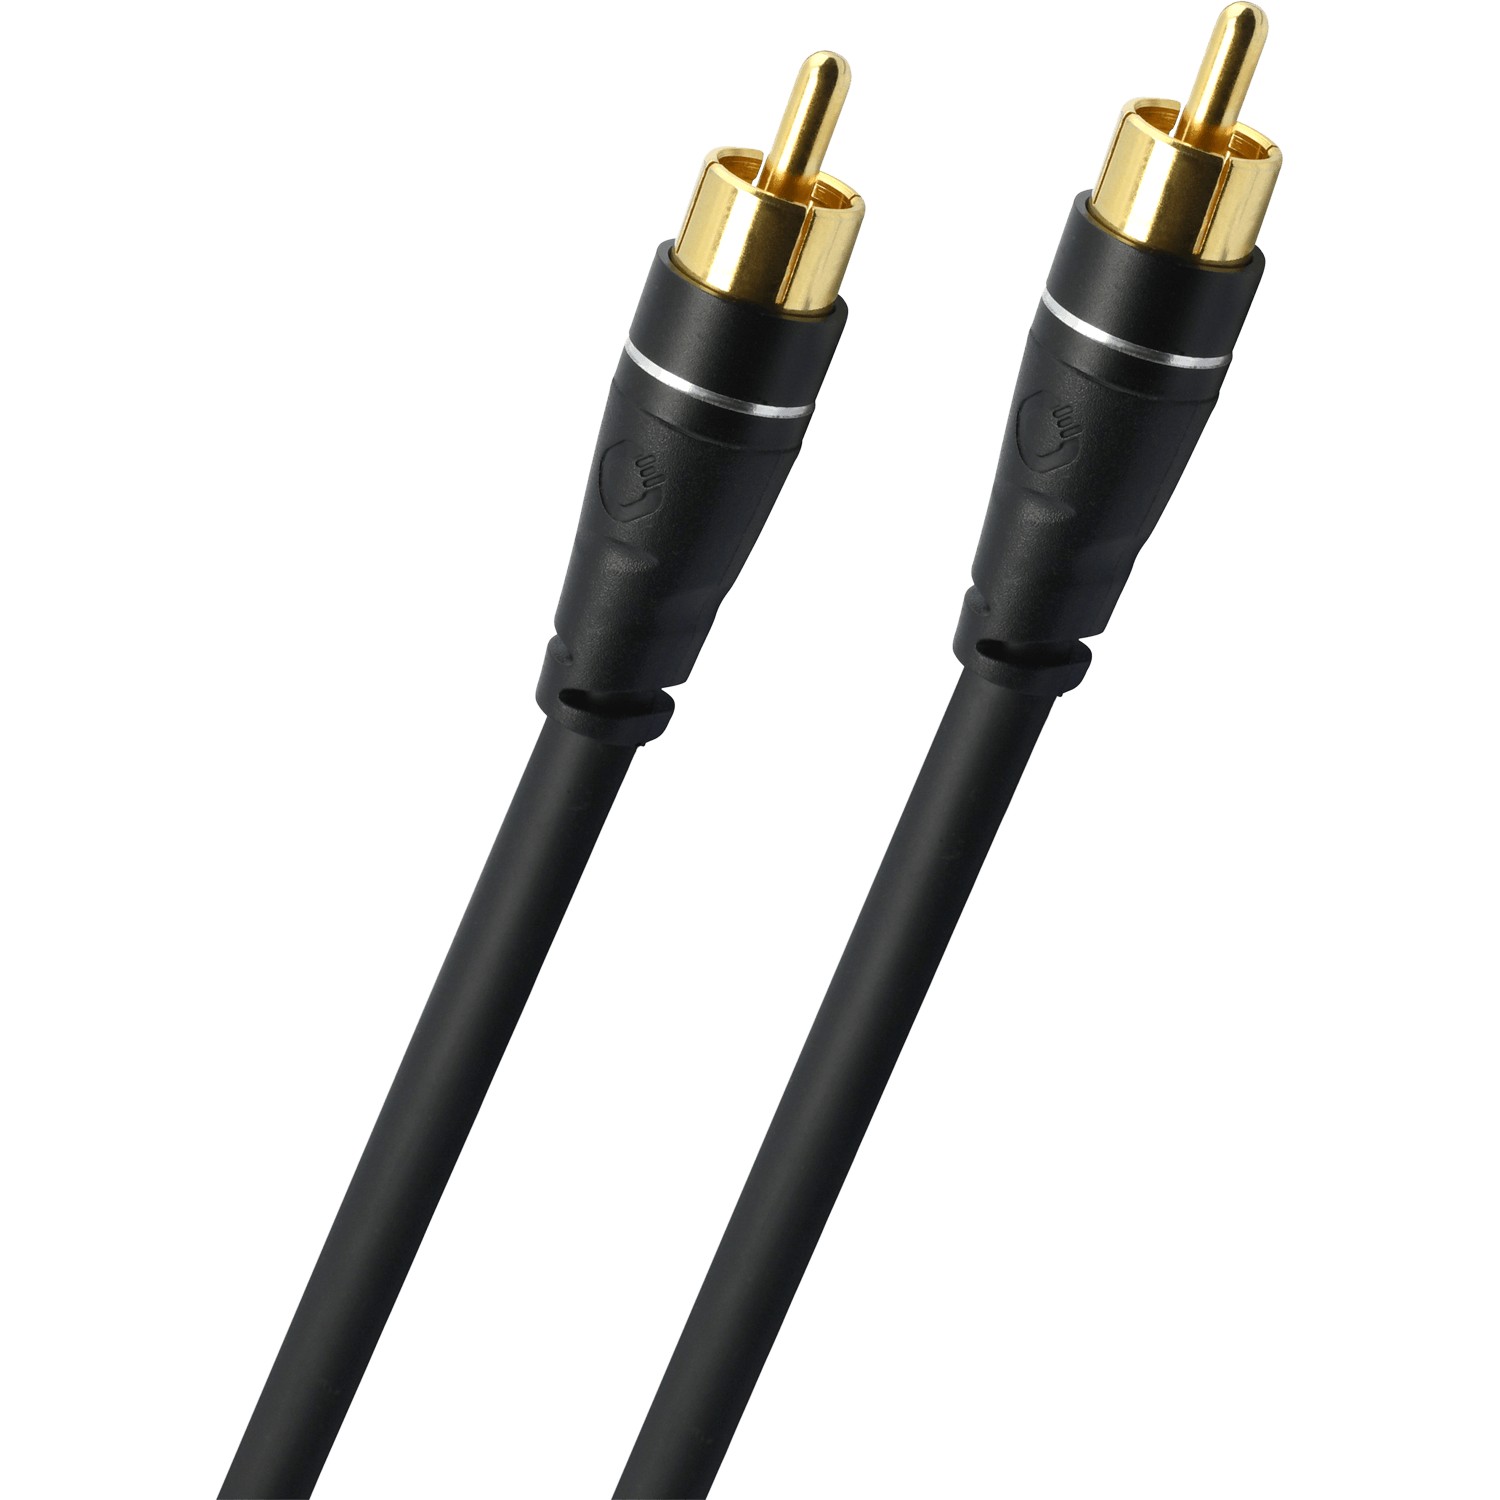 Кабели межблочные аудио Oehlbach EXCELLENCE Sub Link Subwoofer cable 10m bw, D1C33164 pocl cameralink sdr to sdr cable camera link mini 26pin sdr industrial dalsa camera pocl cables